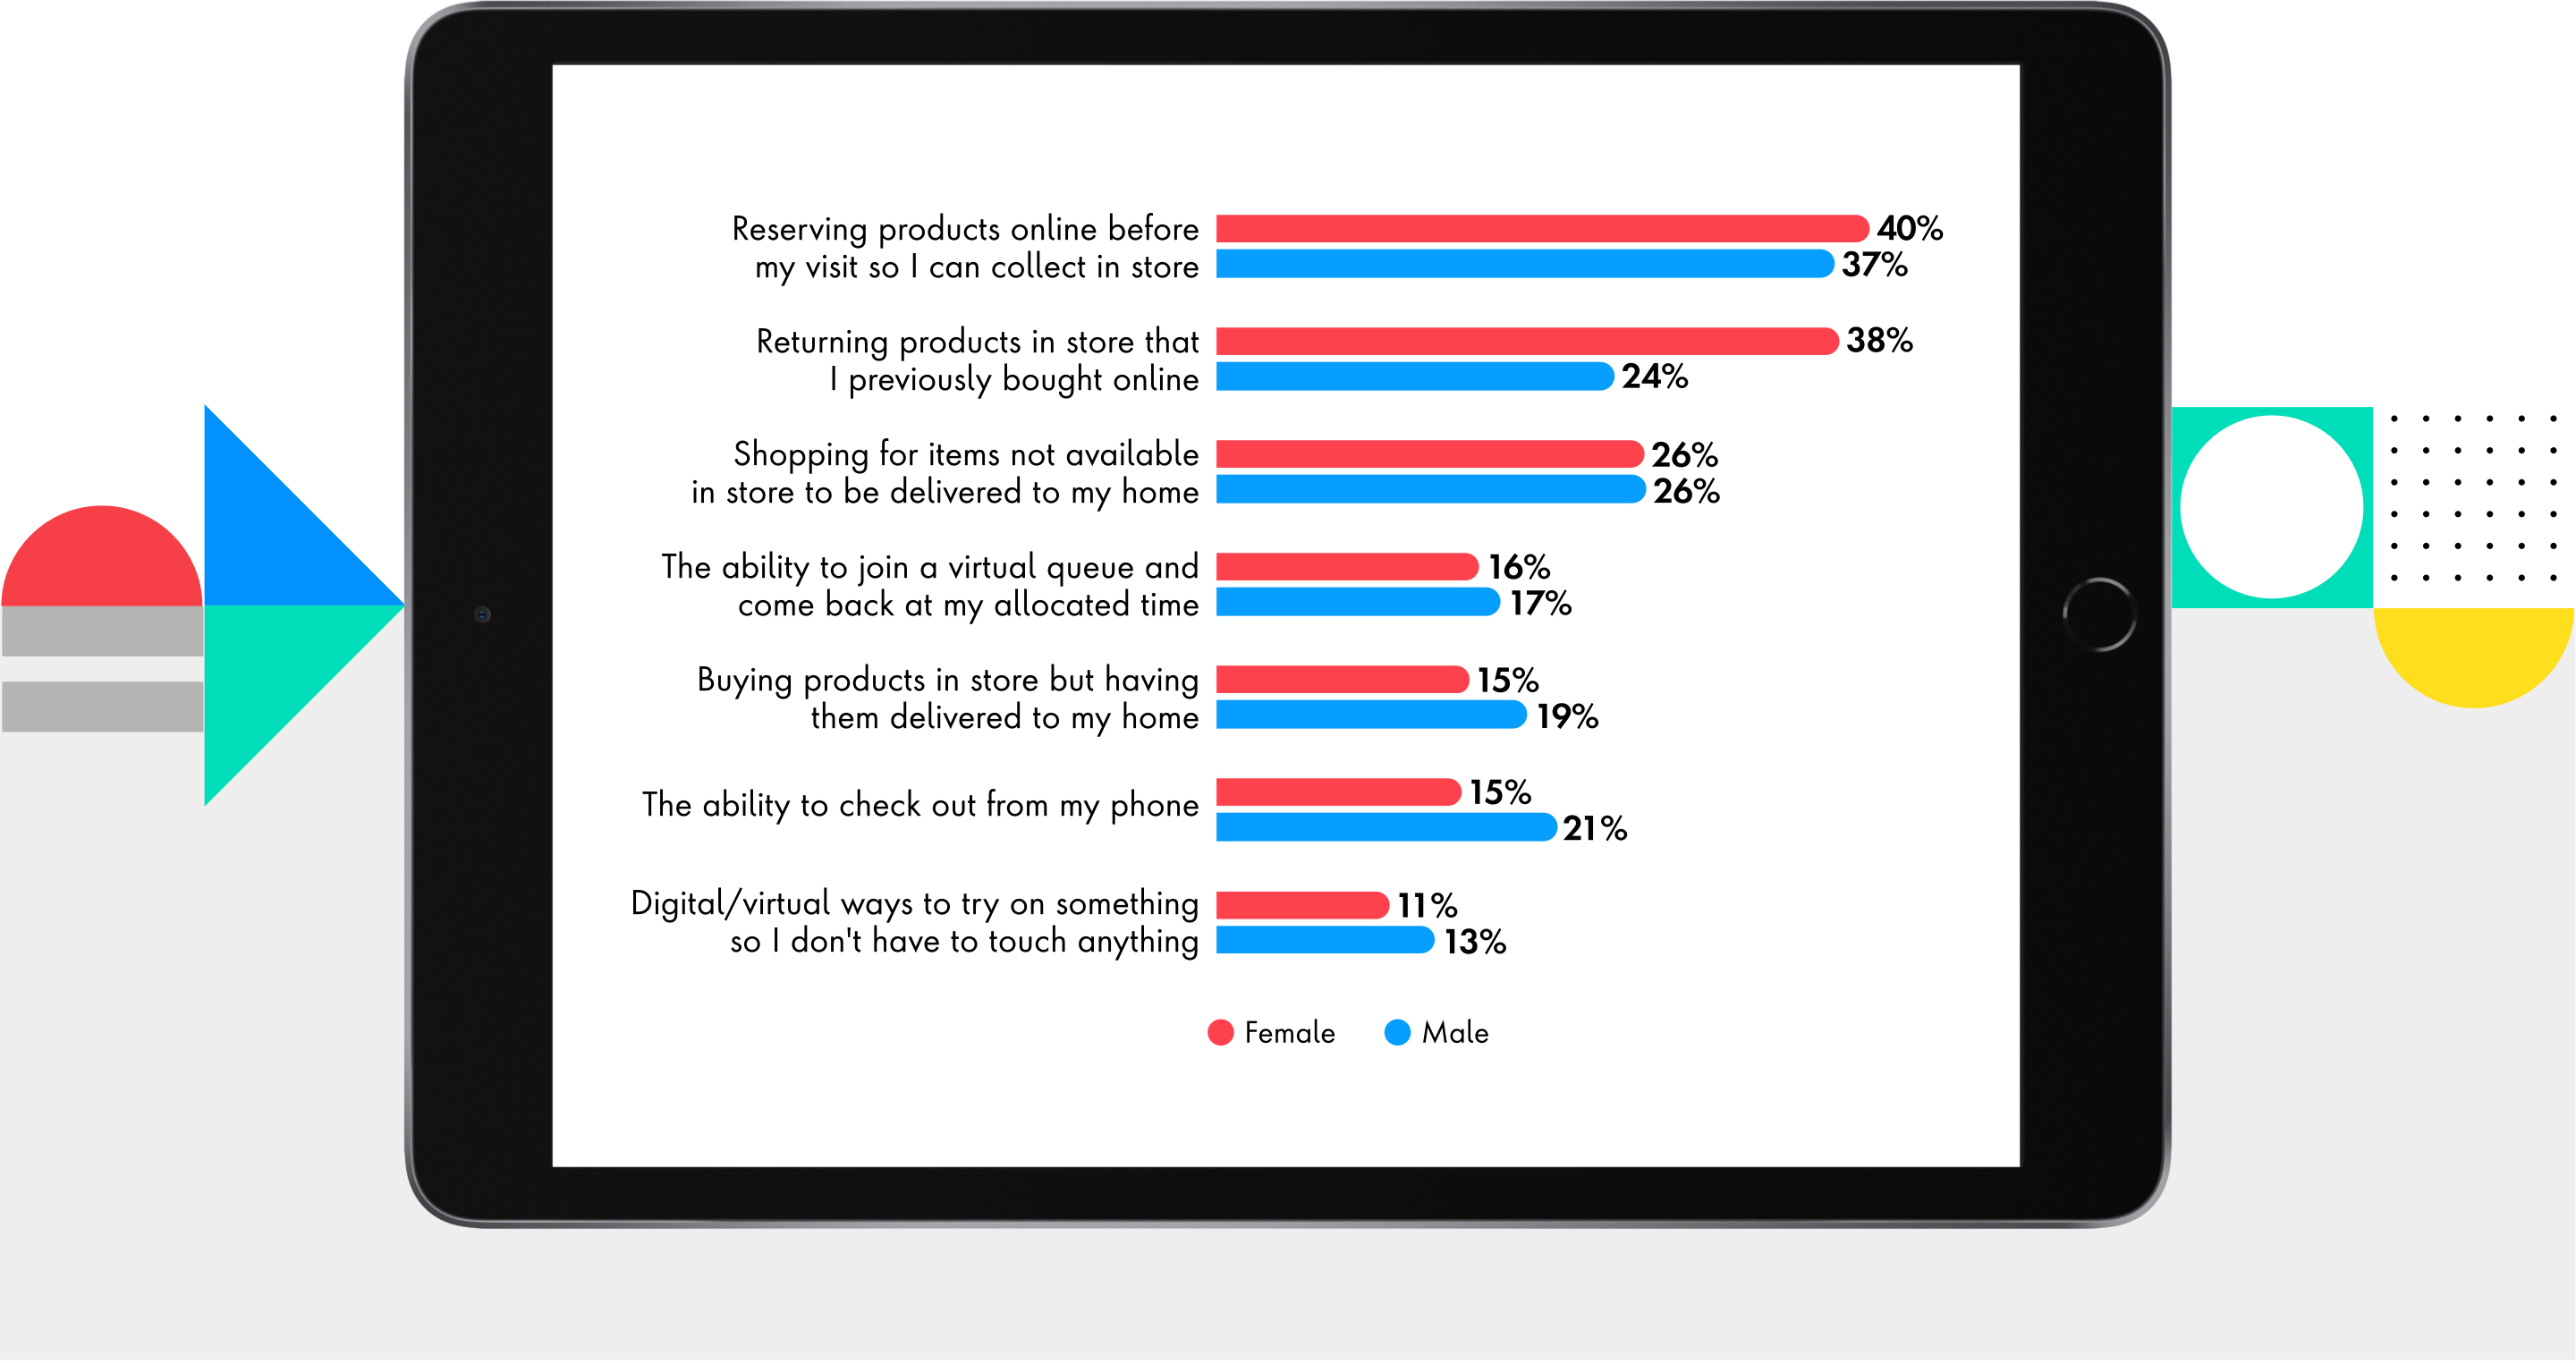 Image of an iPad with a chart on screen showing digital services people want retailers to have.